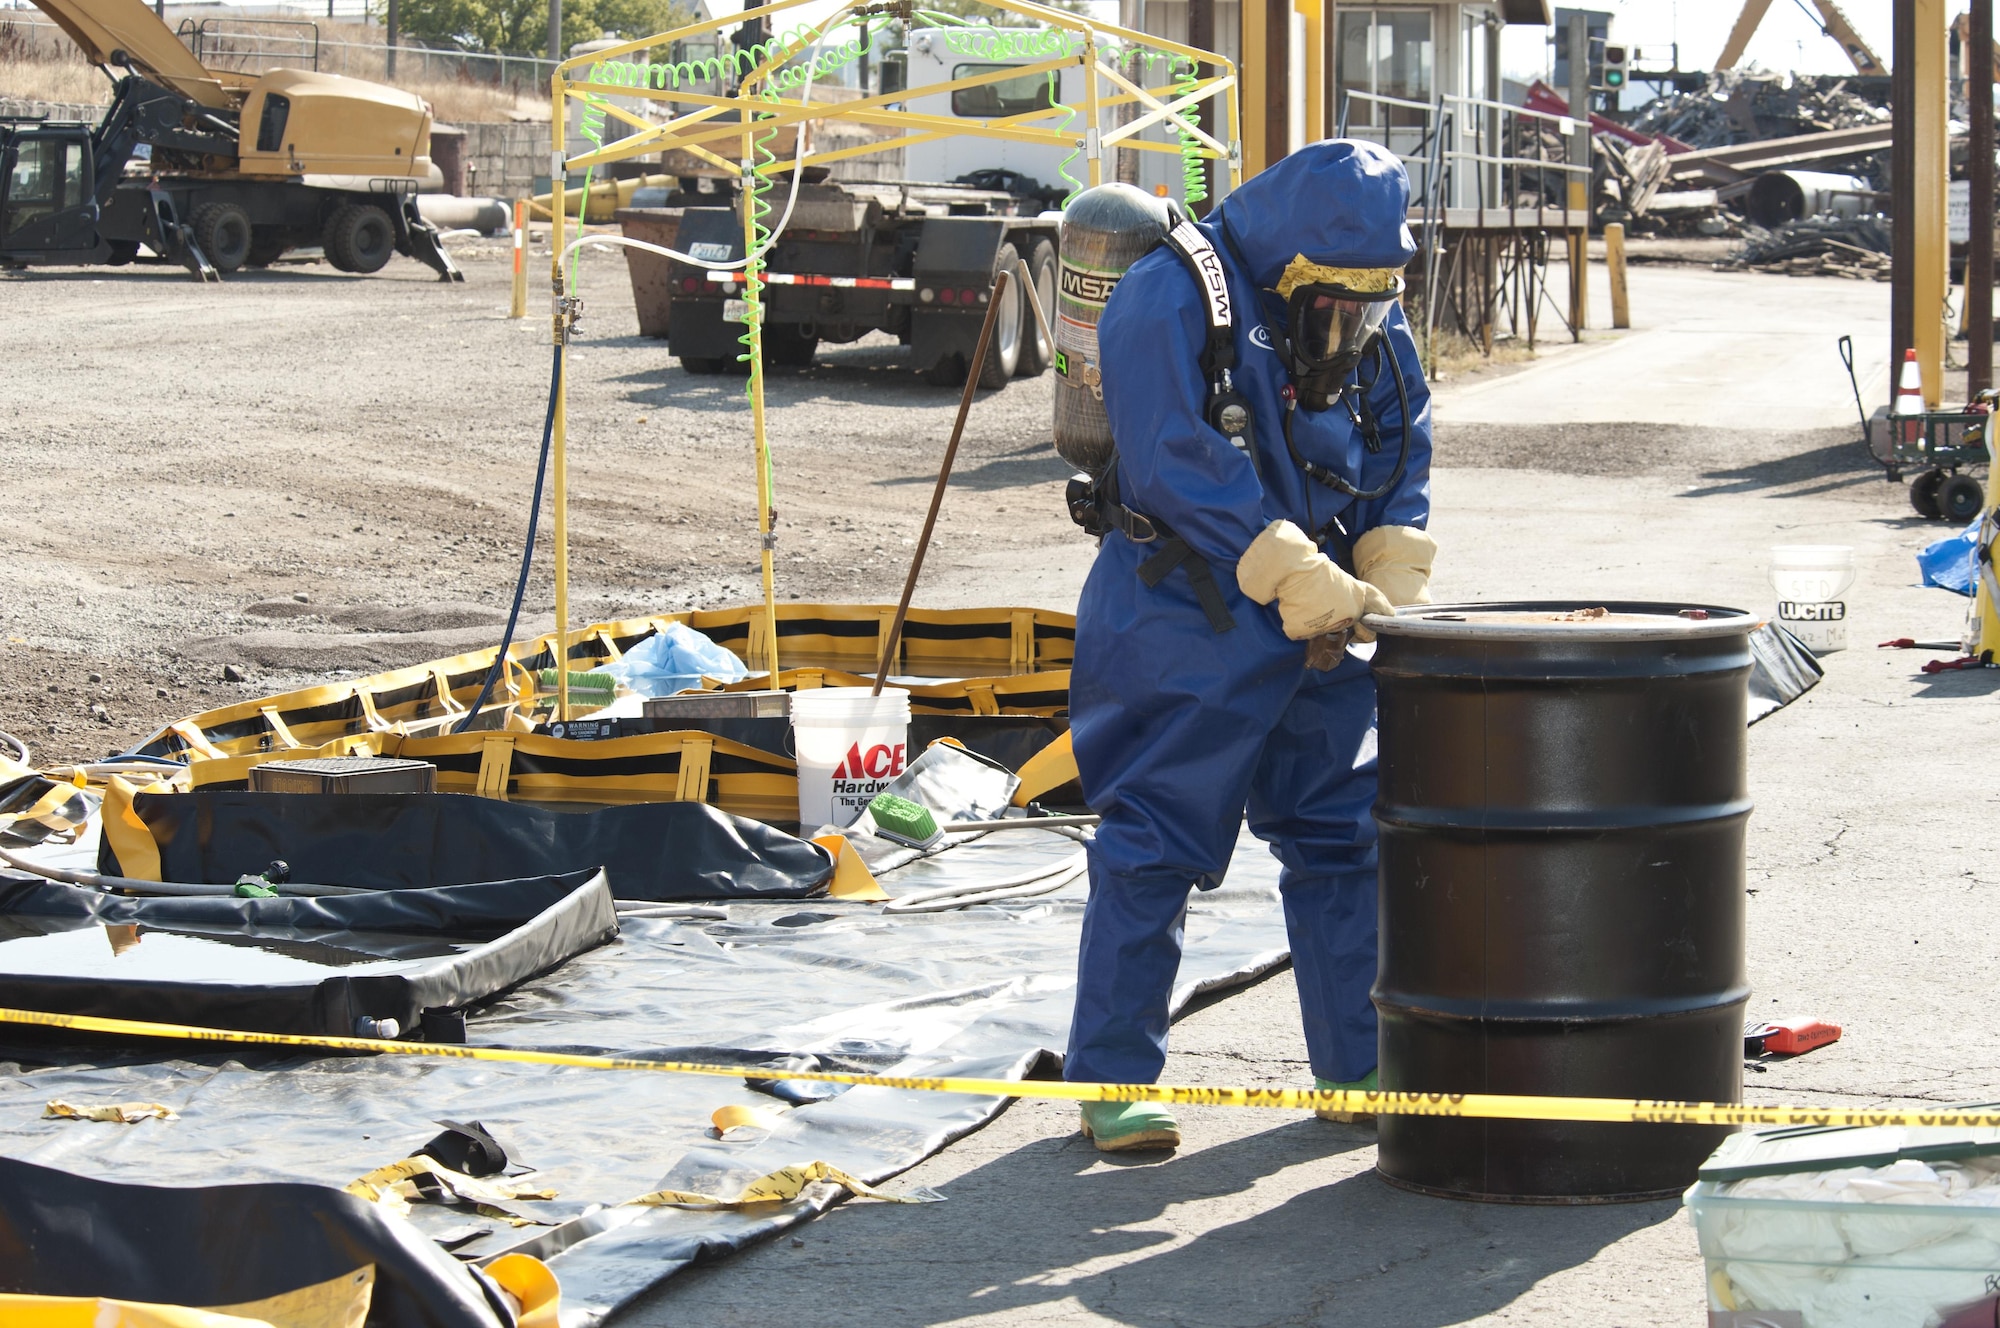 Senior Airman Nicholas Bouselli, a 92nd Civil Engineer Squadron emergency management journeyman, approaches a metal drum containing the clothes of those directly exposed to a chlorine gas leak Aug. 12, 2015, at Pacific Steal and Recycling in Spokane, Wash. More than 25 people felt the effects of the chemical leak and have since been treated by medical responders. (U.S. Air Force photo/Airman Sean Campbell)